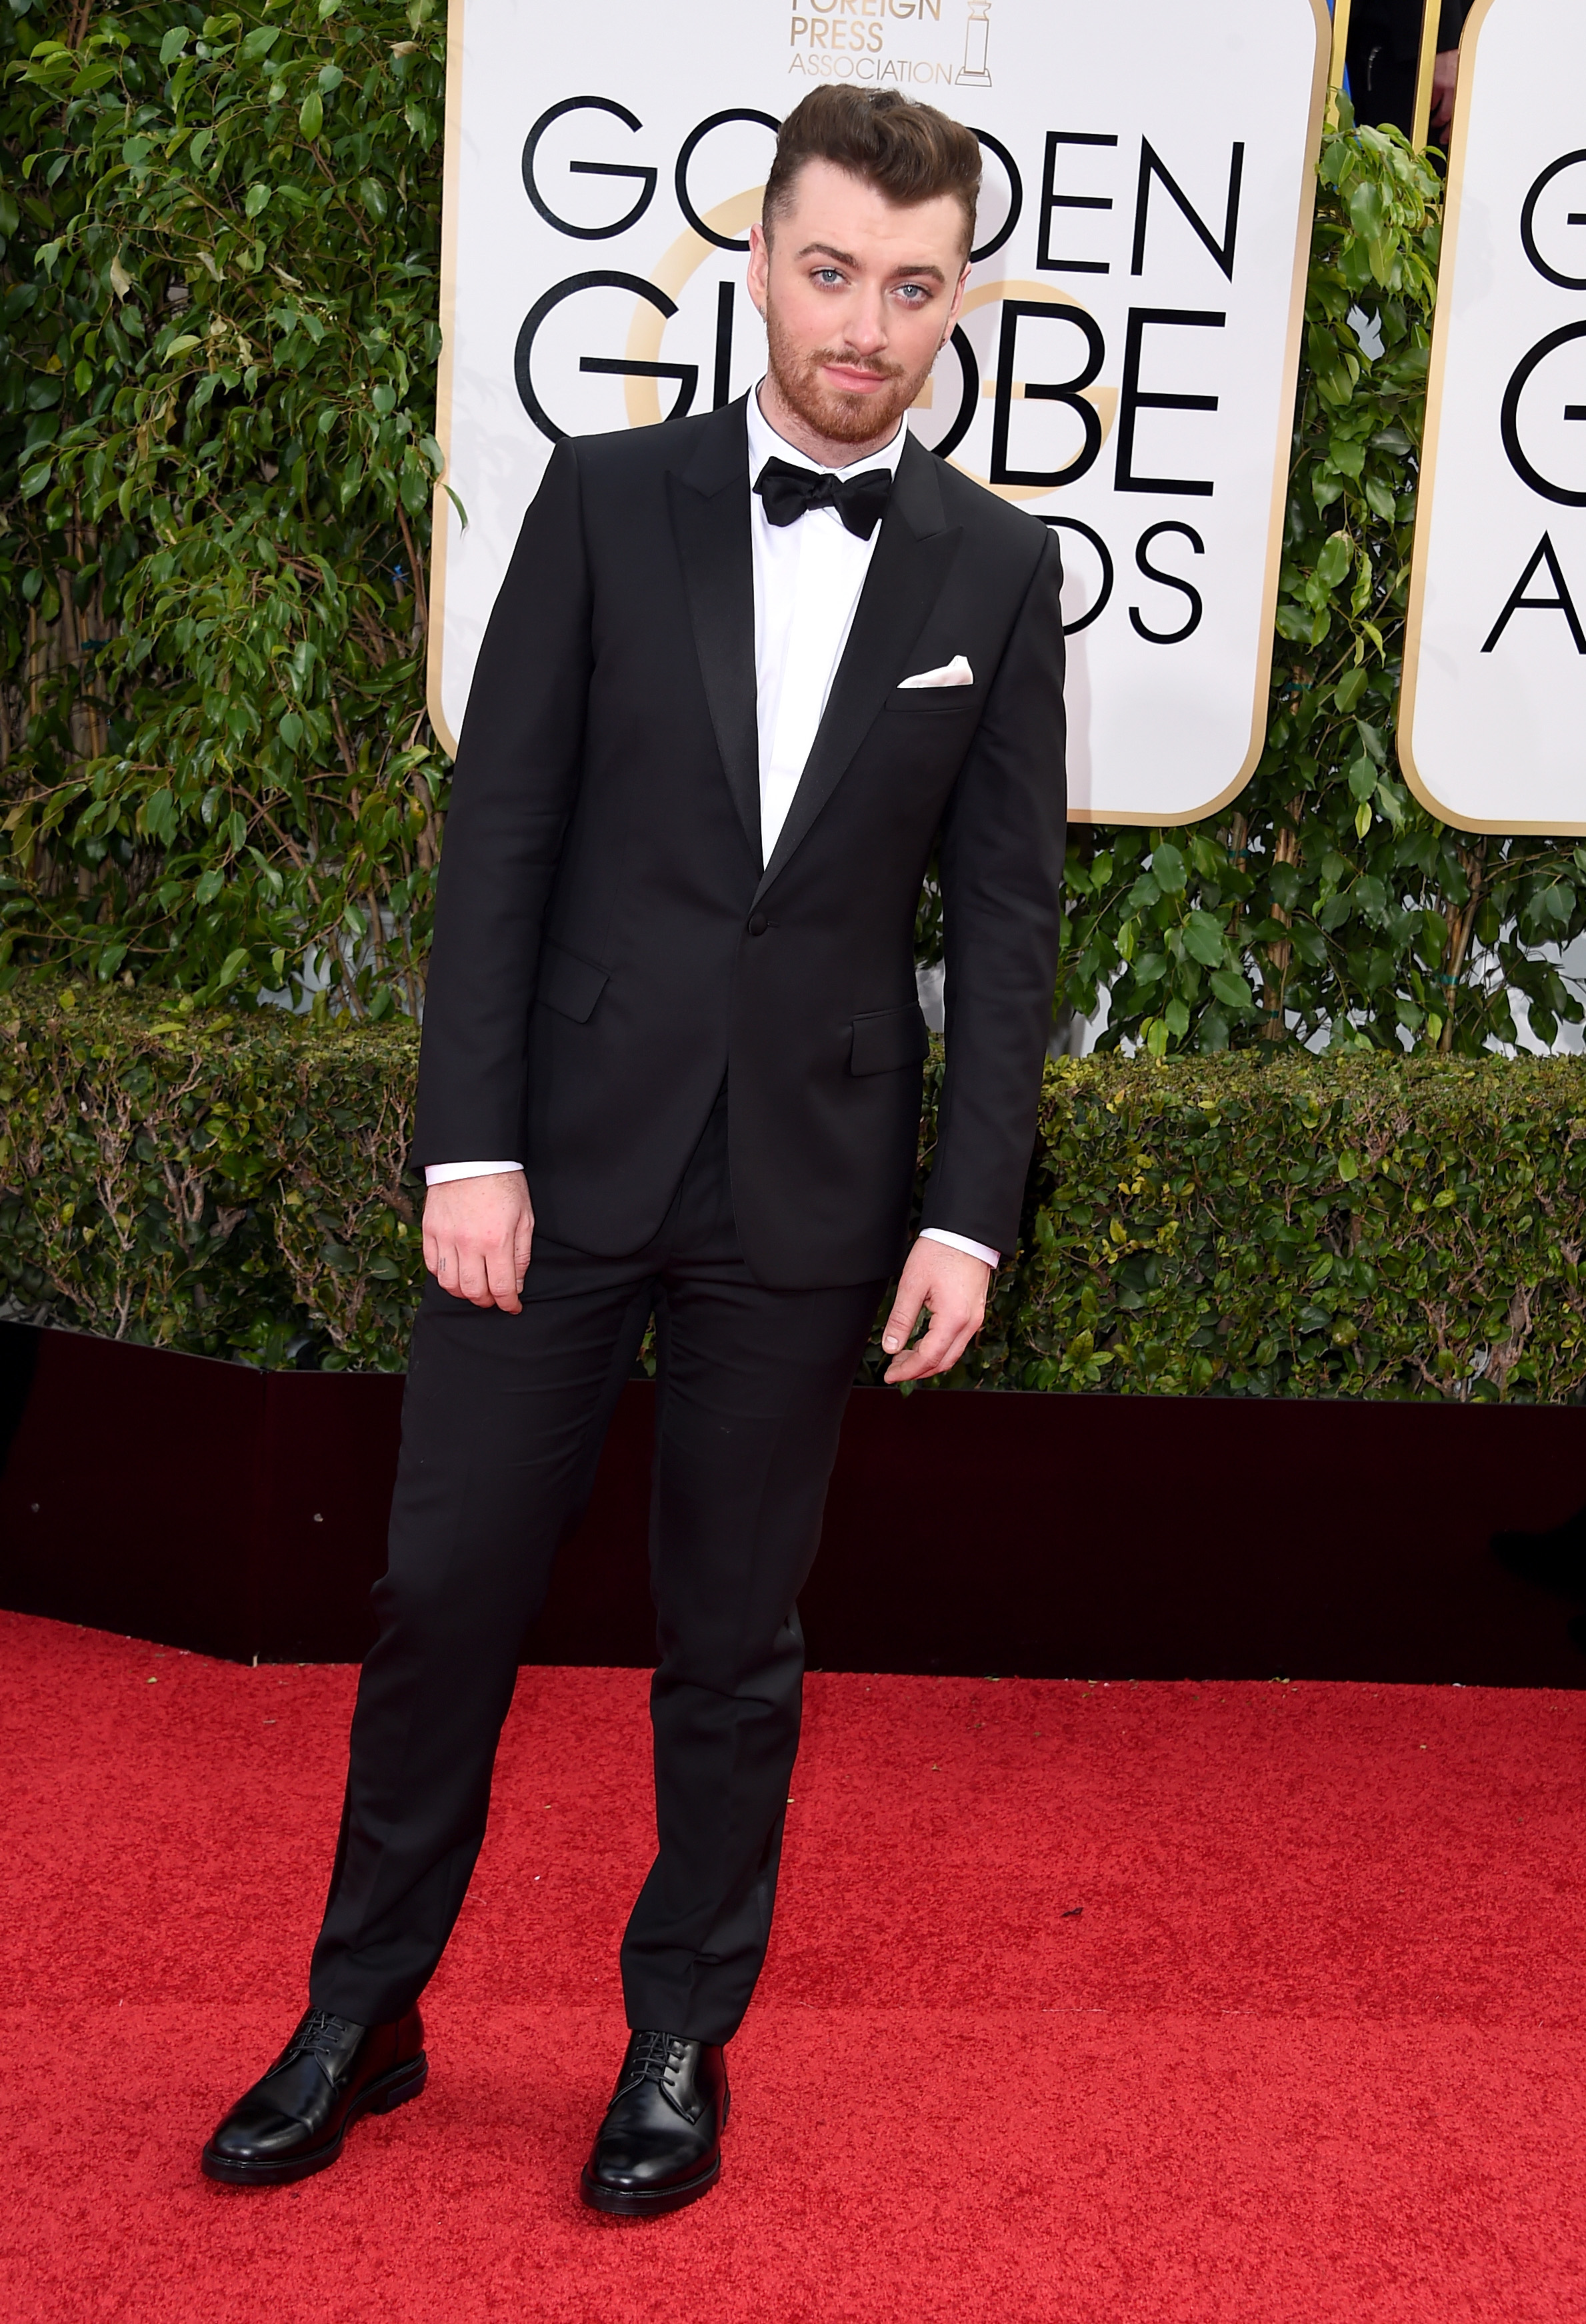 Sam Smith arrives to the 73rd Annual Golden Globe Awards on Jan. 10, 2016 in Beverly Hills.